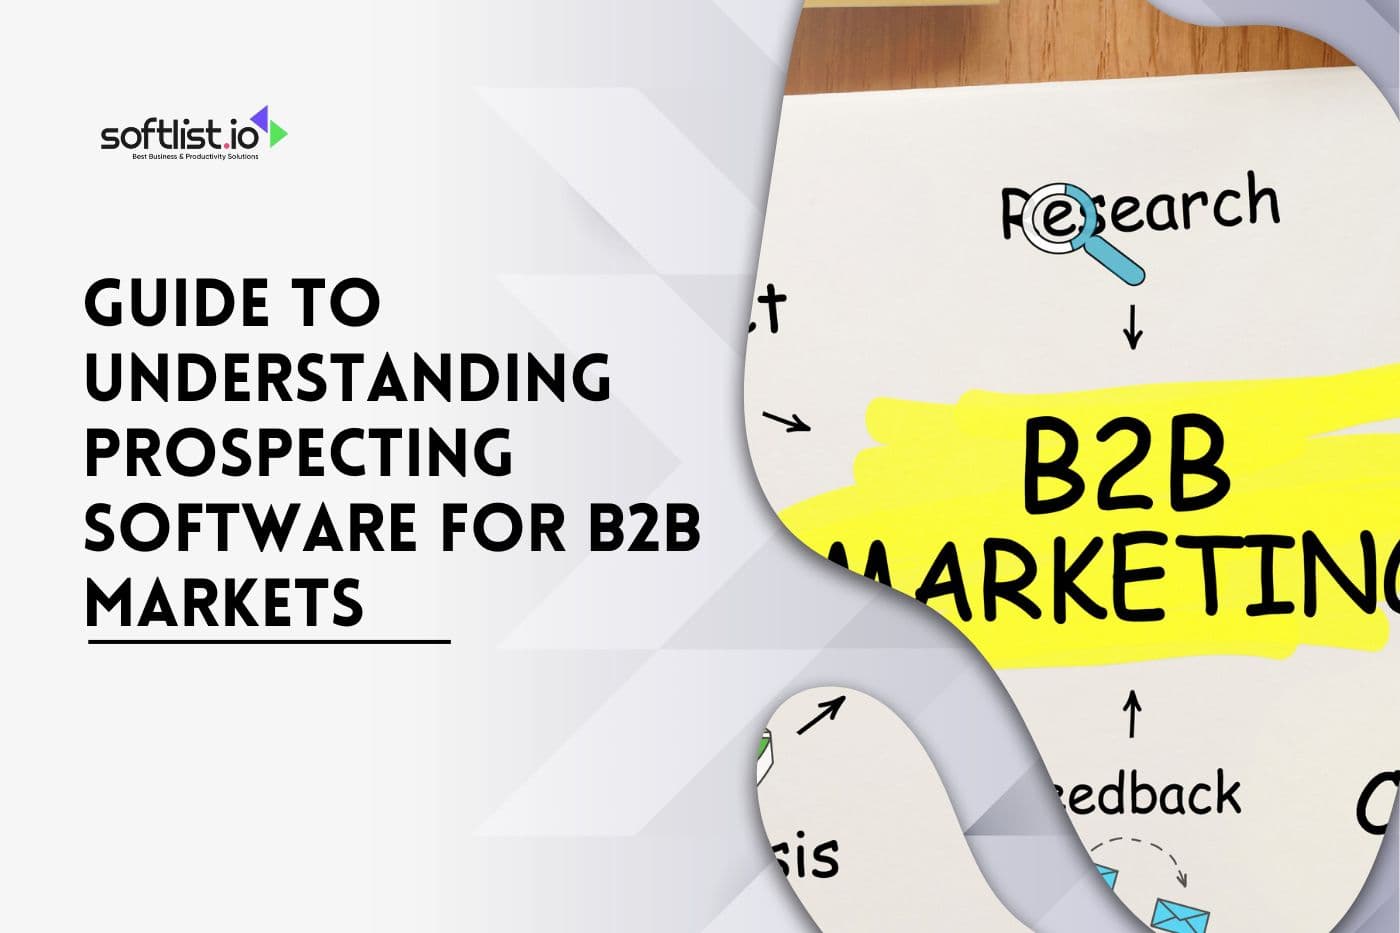 Guide to Understanding Prospecting Software for B2B Markets